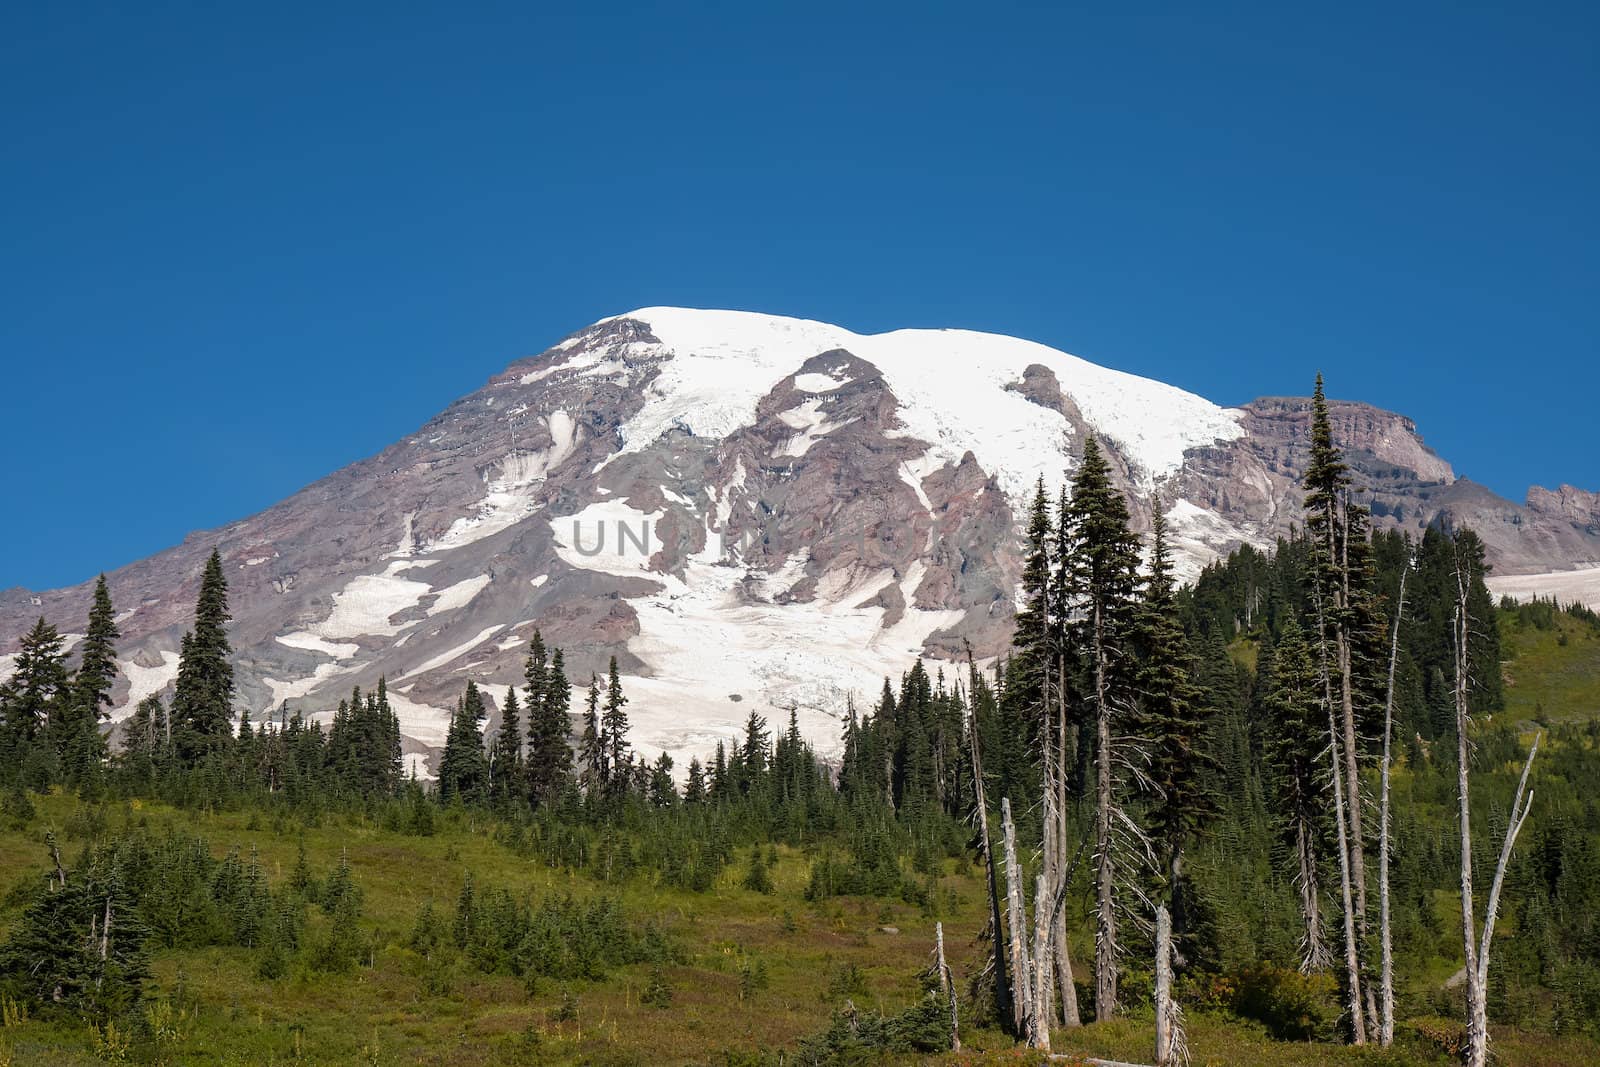 Mount Rainier looks very peaceful and scenic but It is considered to be one of the world's most dangerous volcanoes.